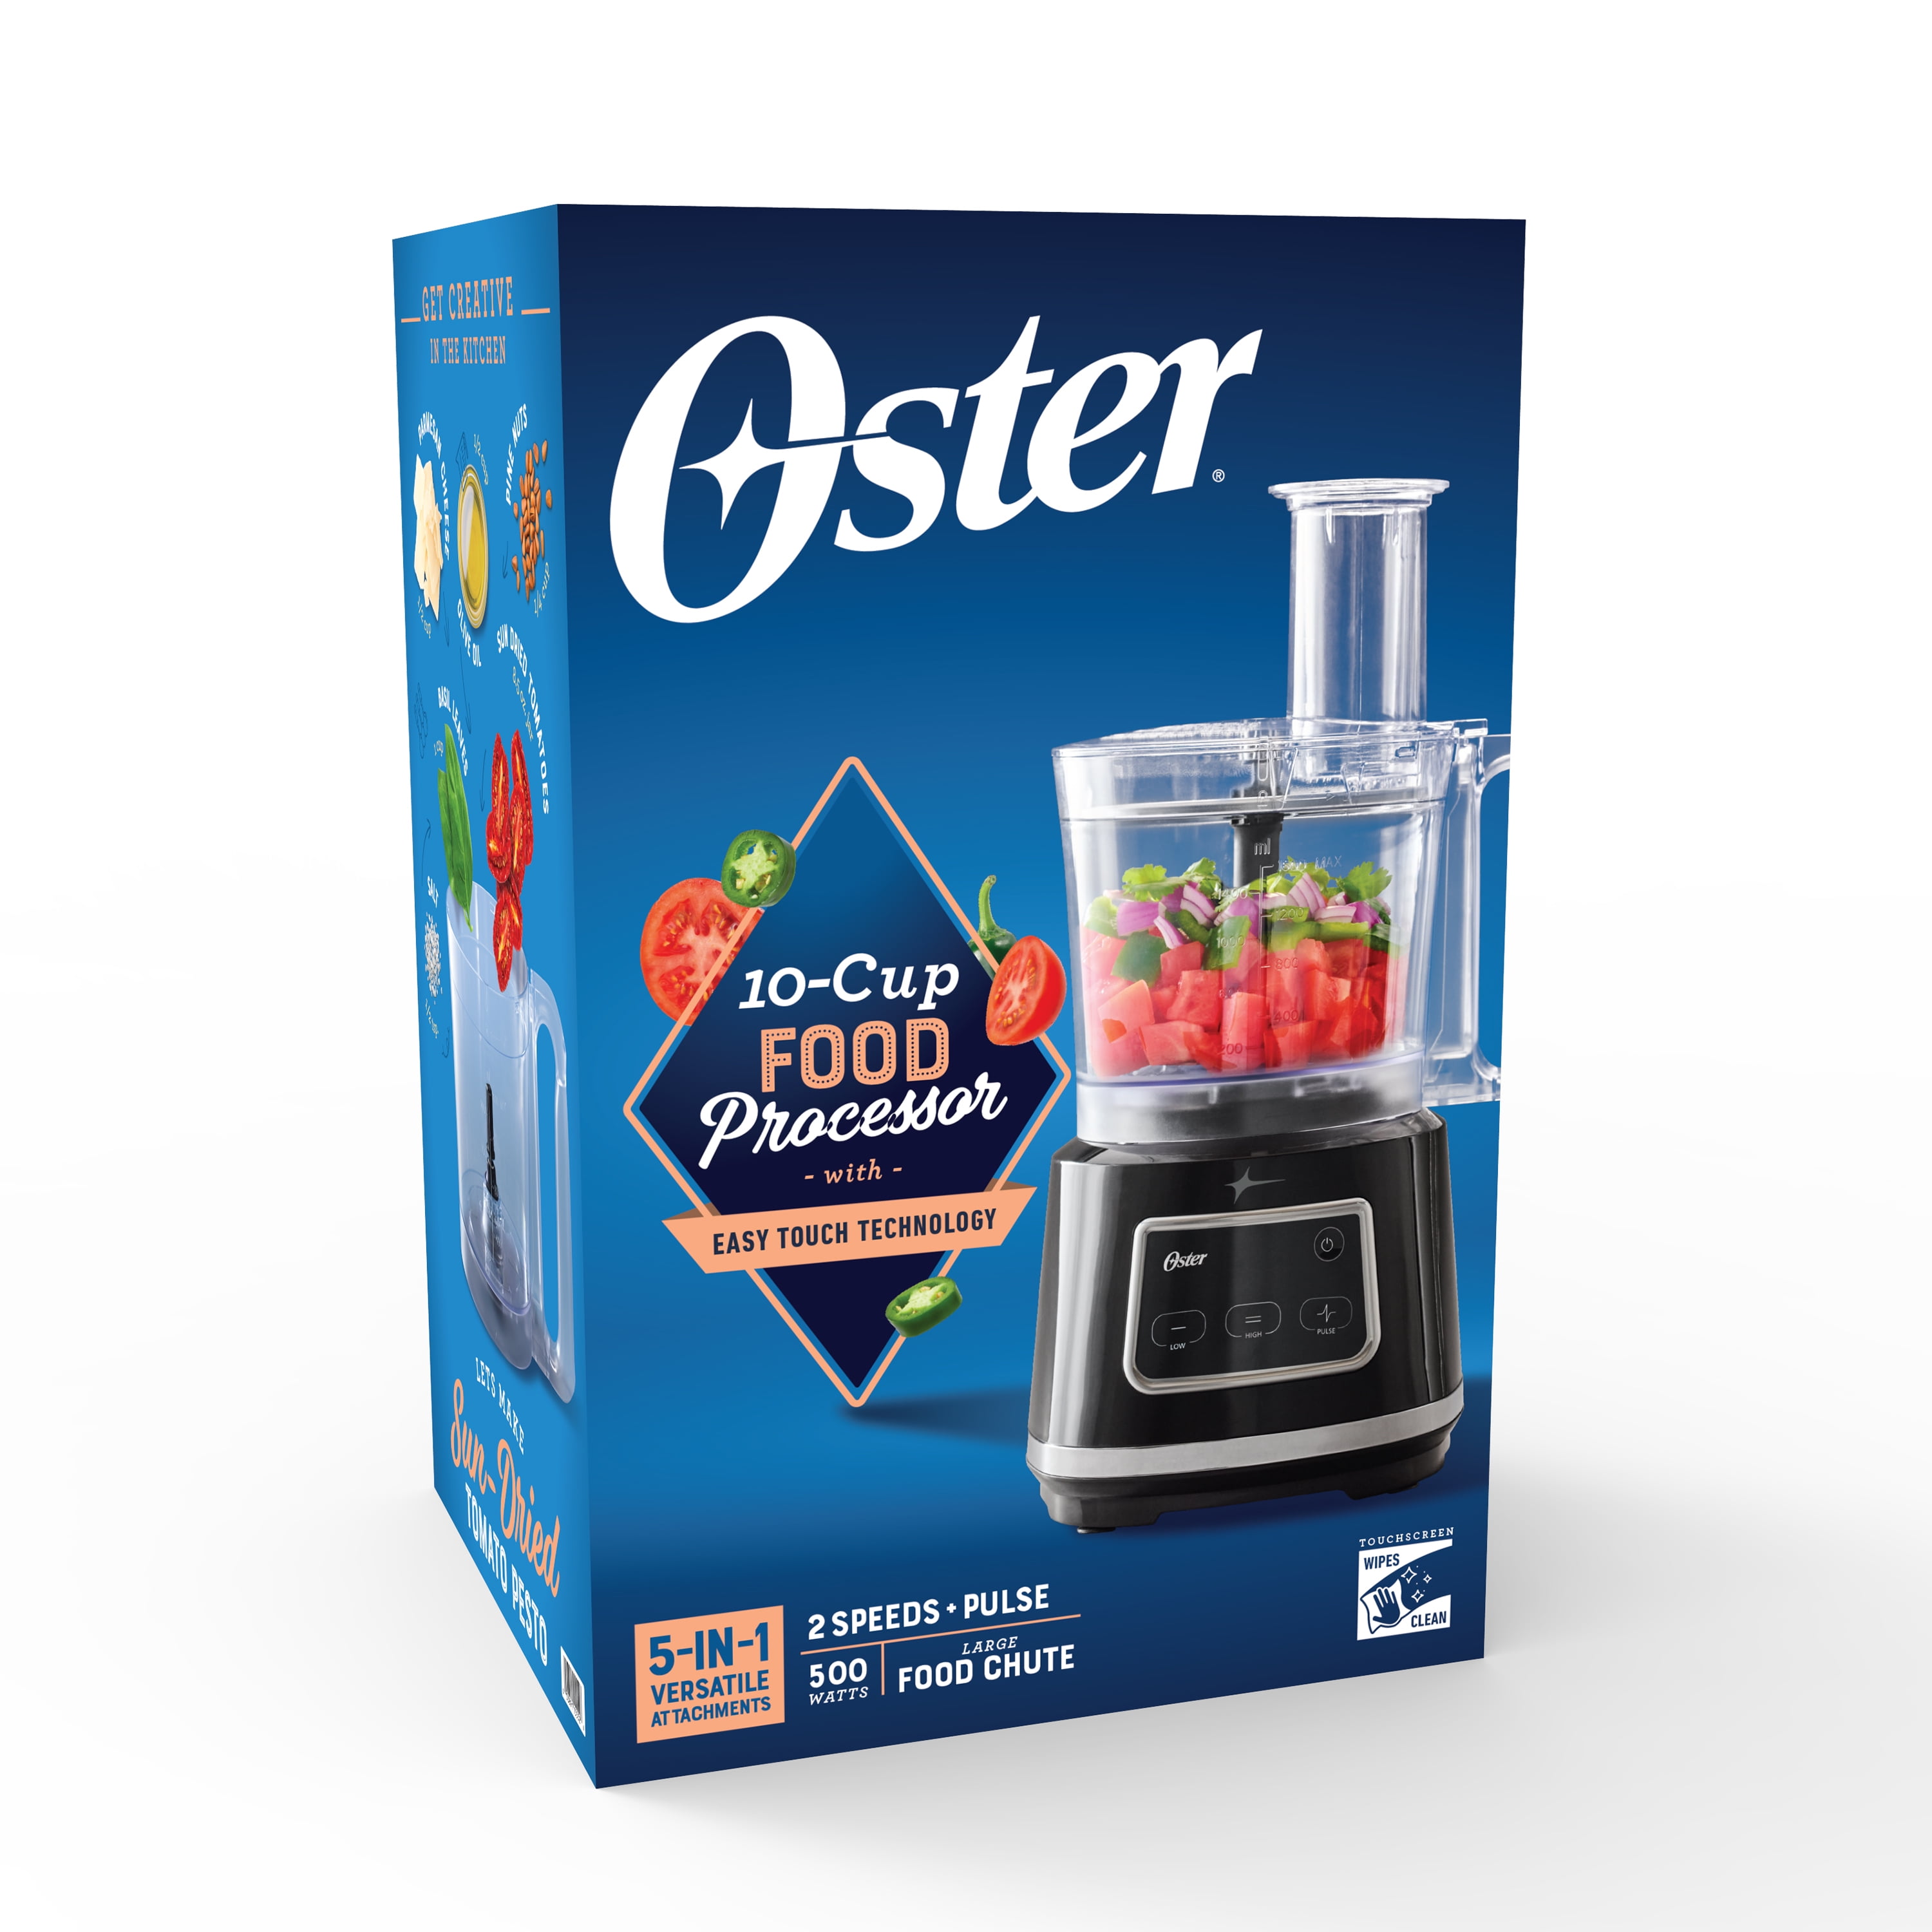 Oster 10-Cup Food Processor with Easy-Touch Technology - Costless WHOLESALE  - Online Shopping!